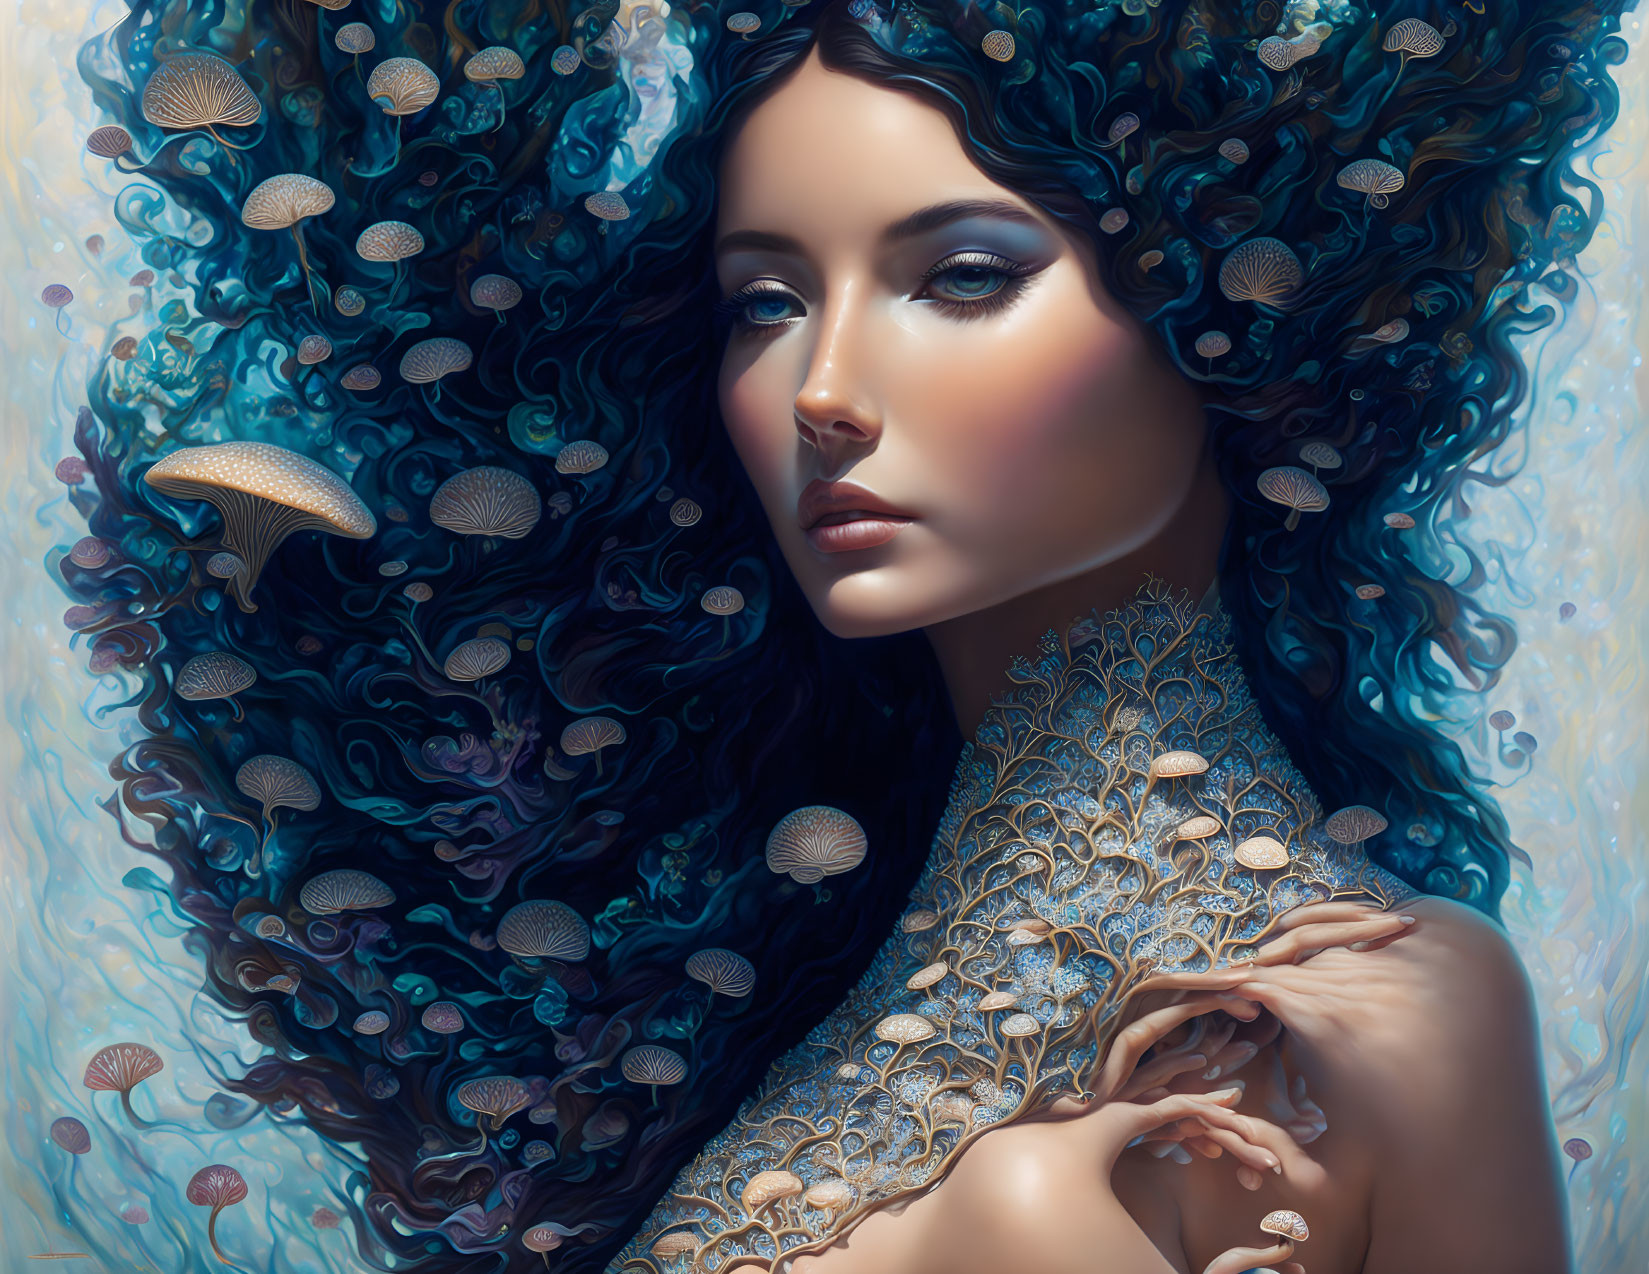 Surreal image: Woman with blue hair among jellyfish in dreamy underwater scene